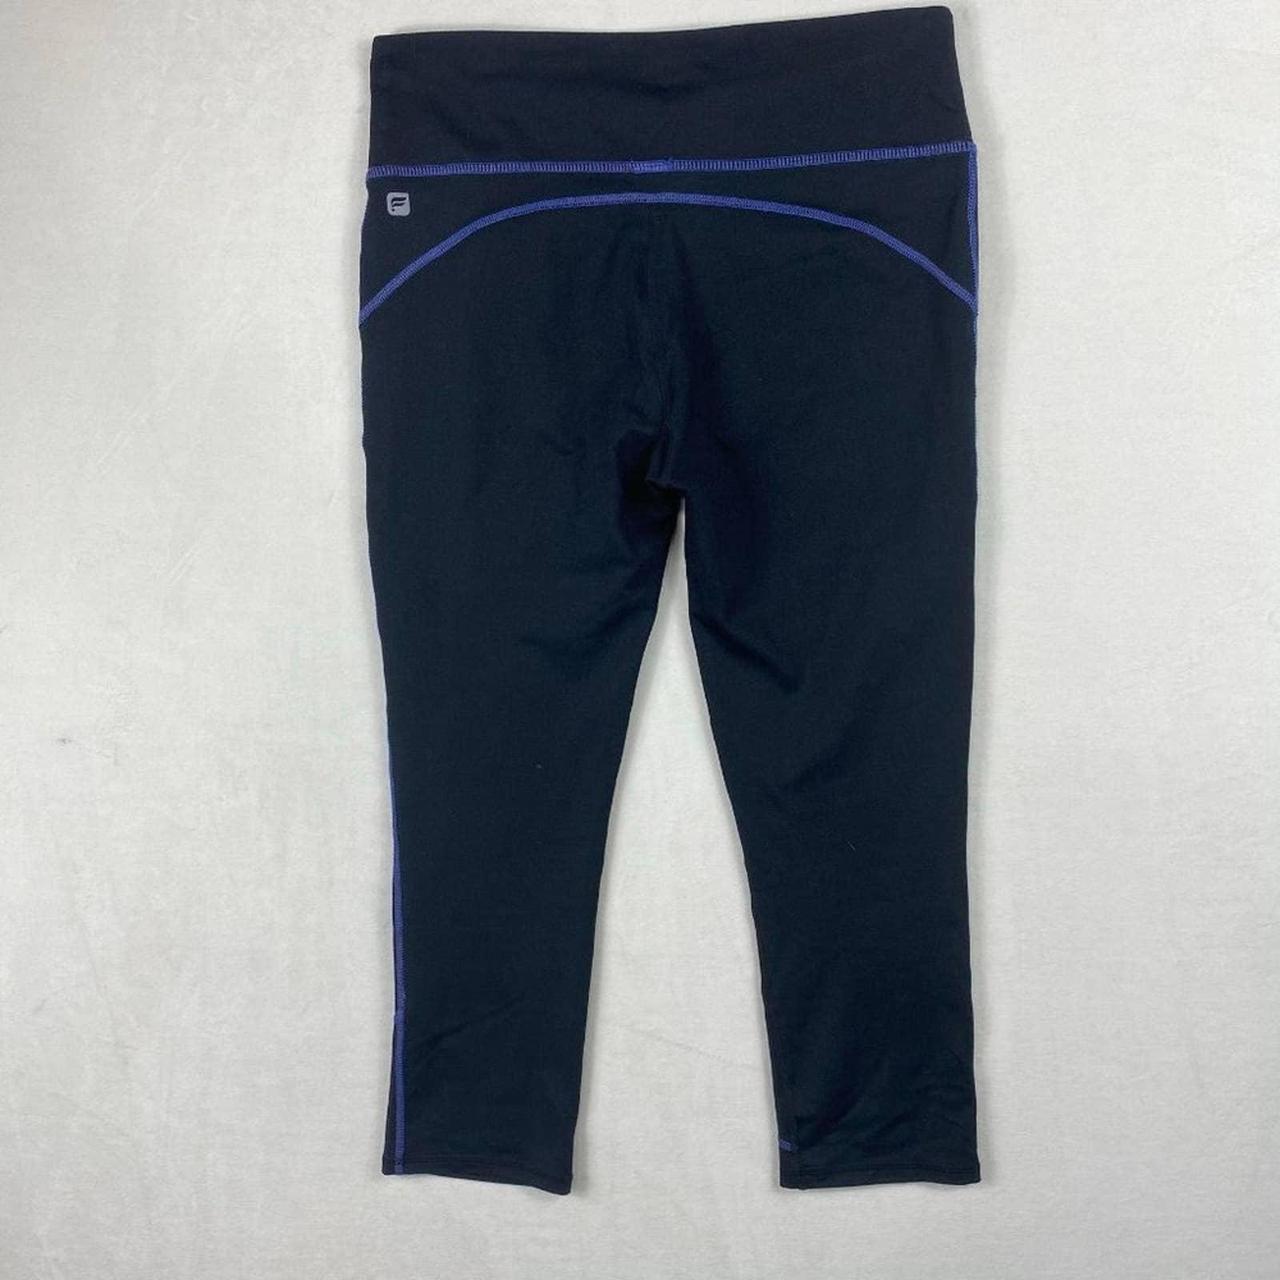 Product Image 2 - Fabletics Dark Blue with Purple